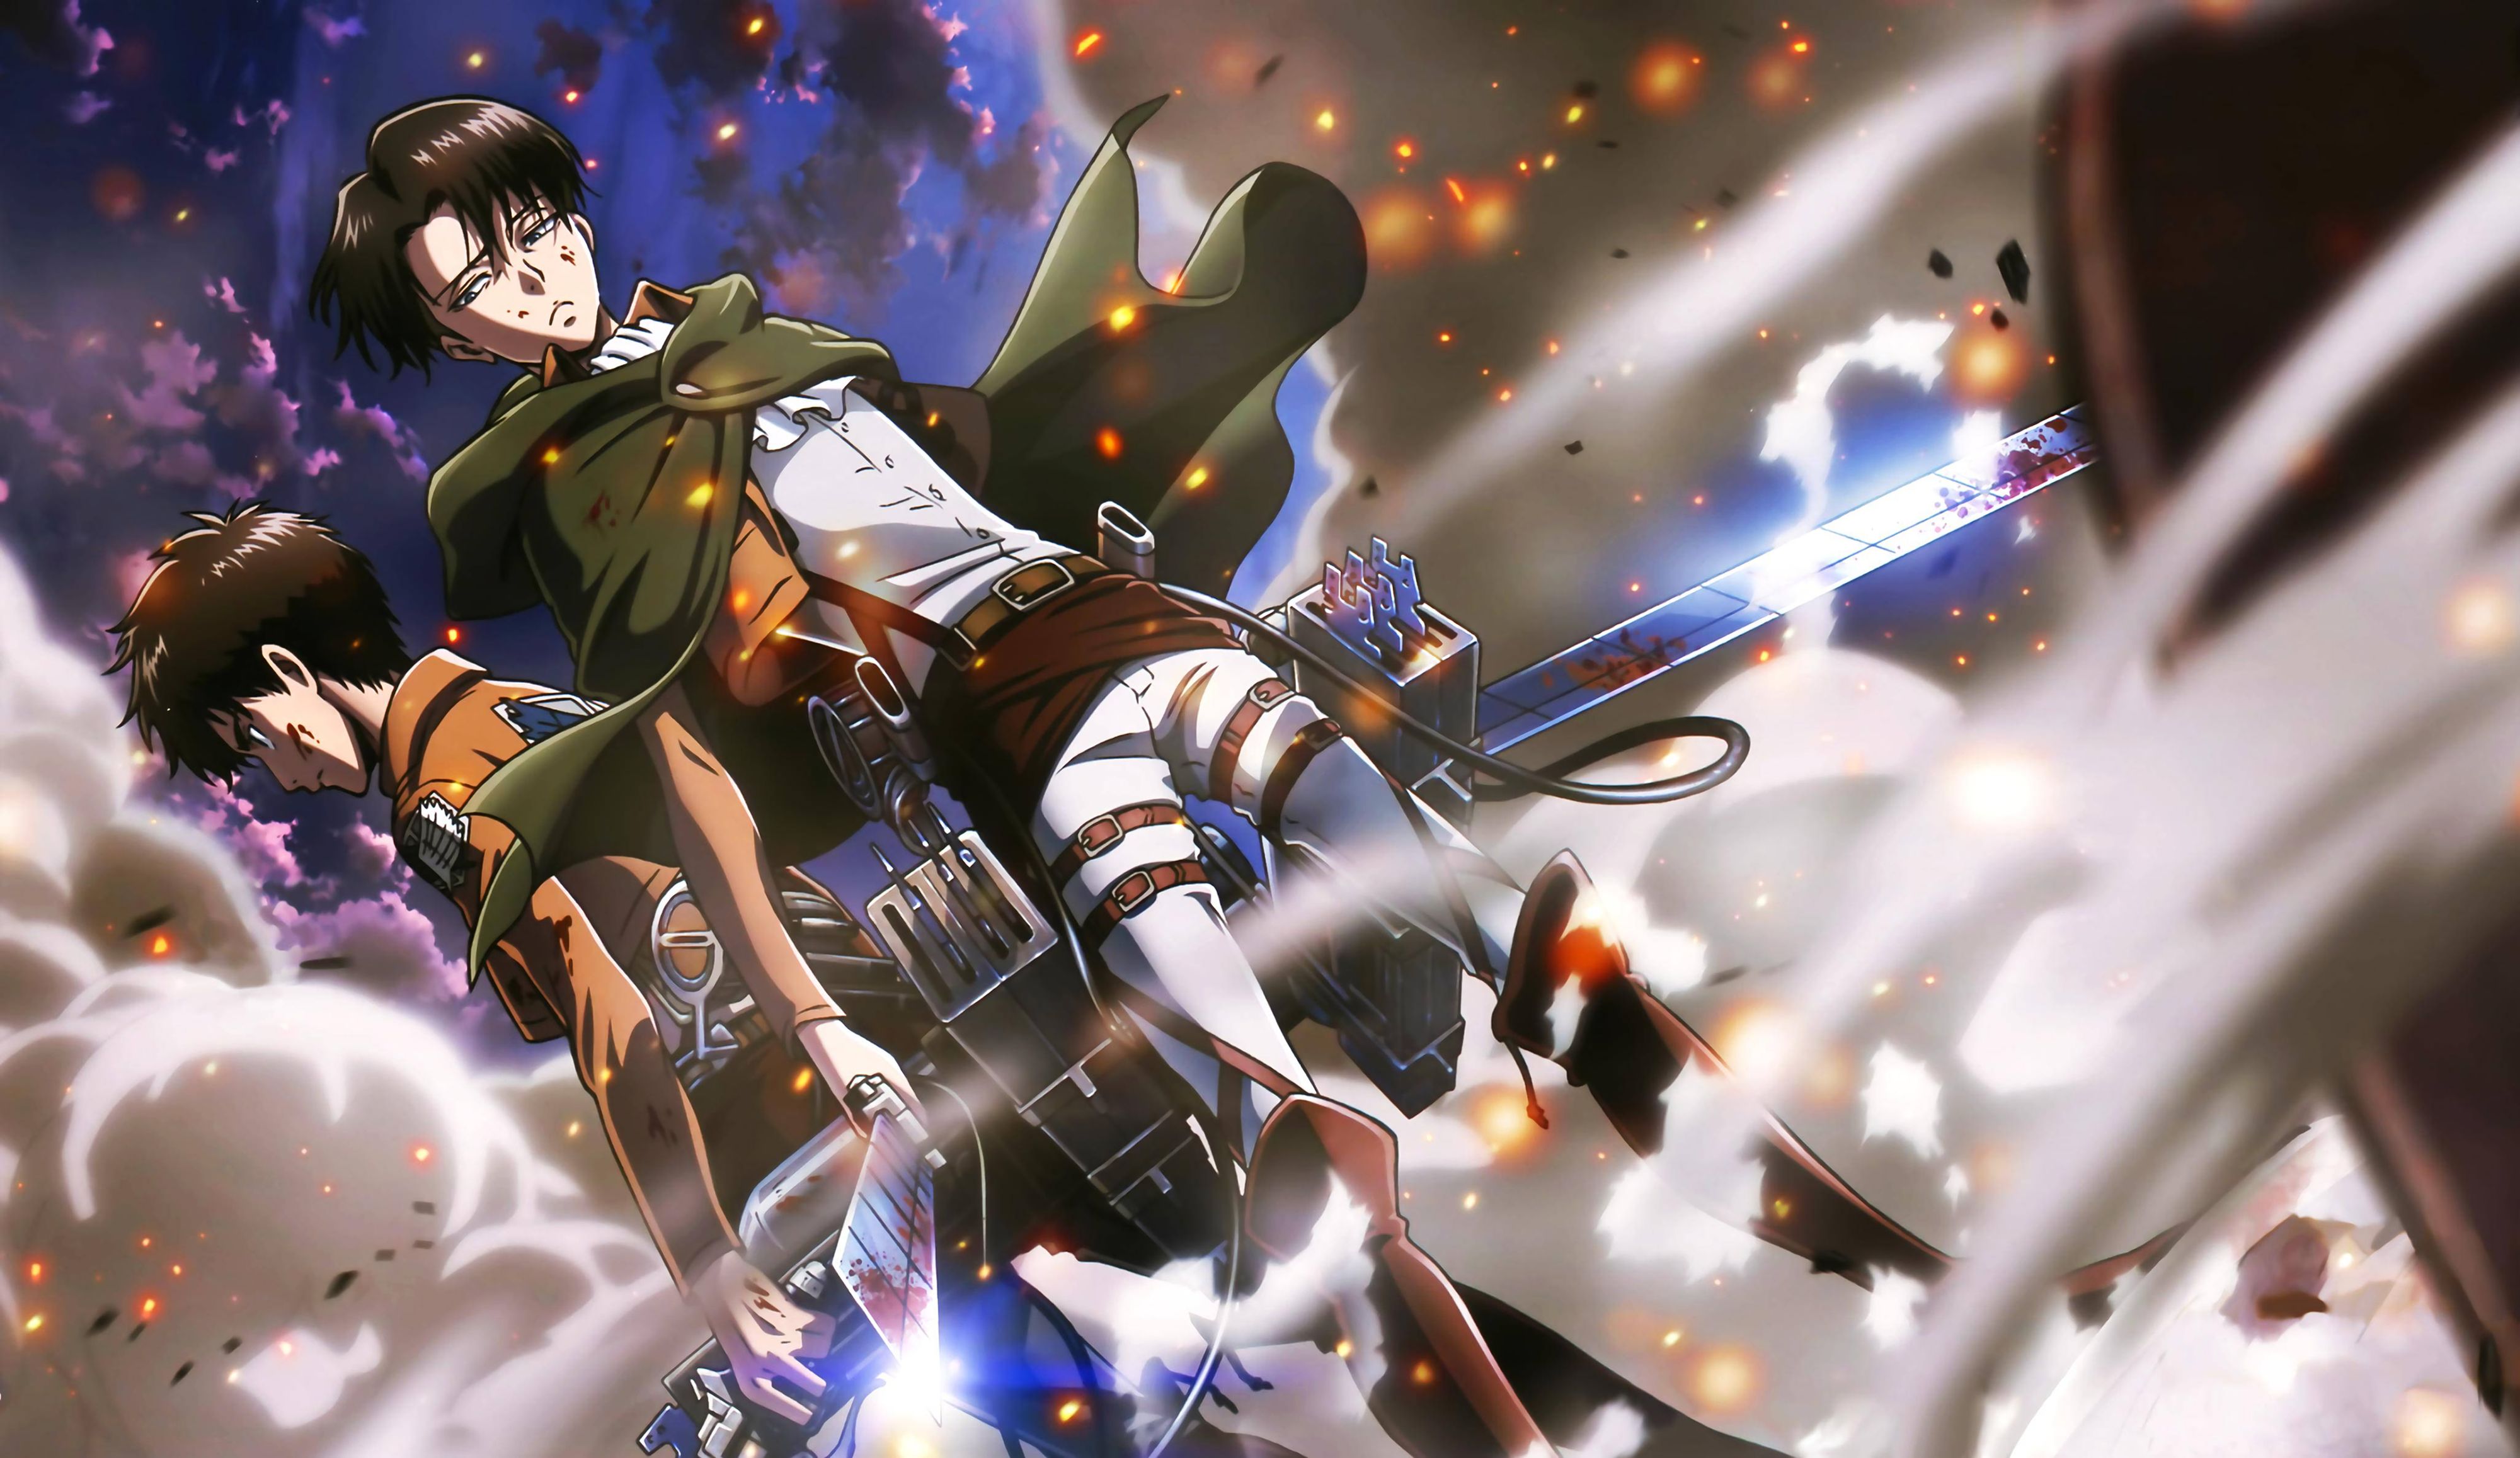 attack on titan, anime, eren yeager, levi ackerman cell phone wallpapers